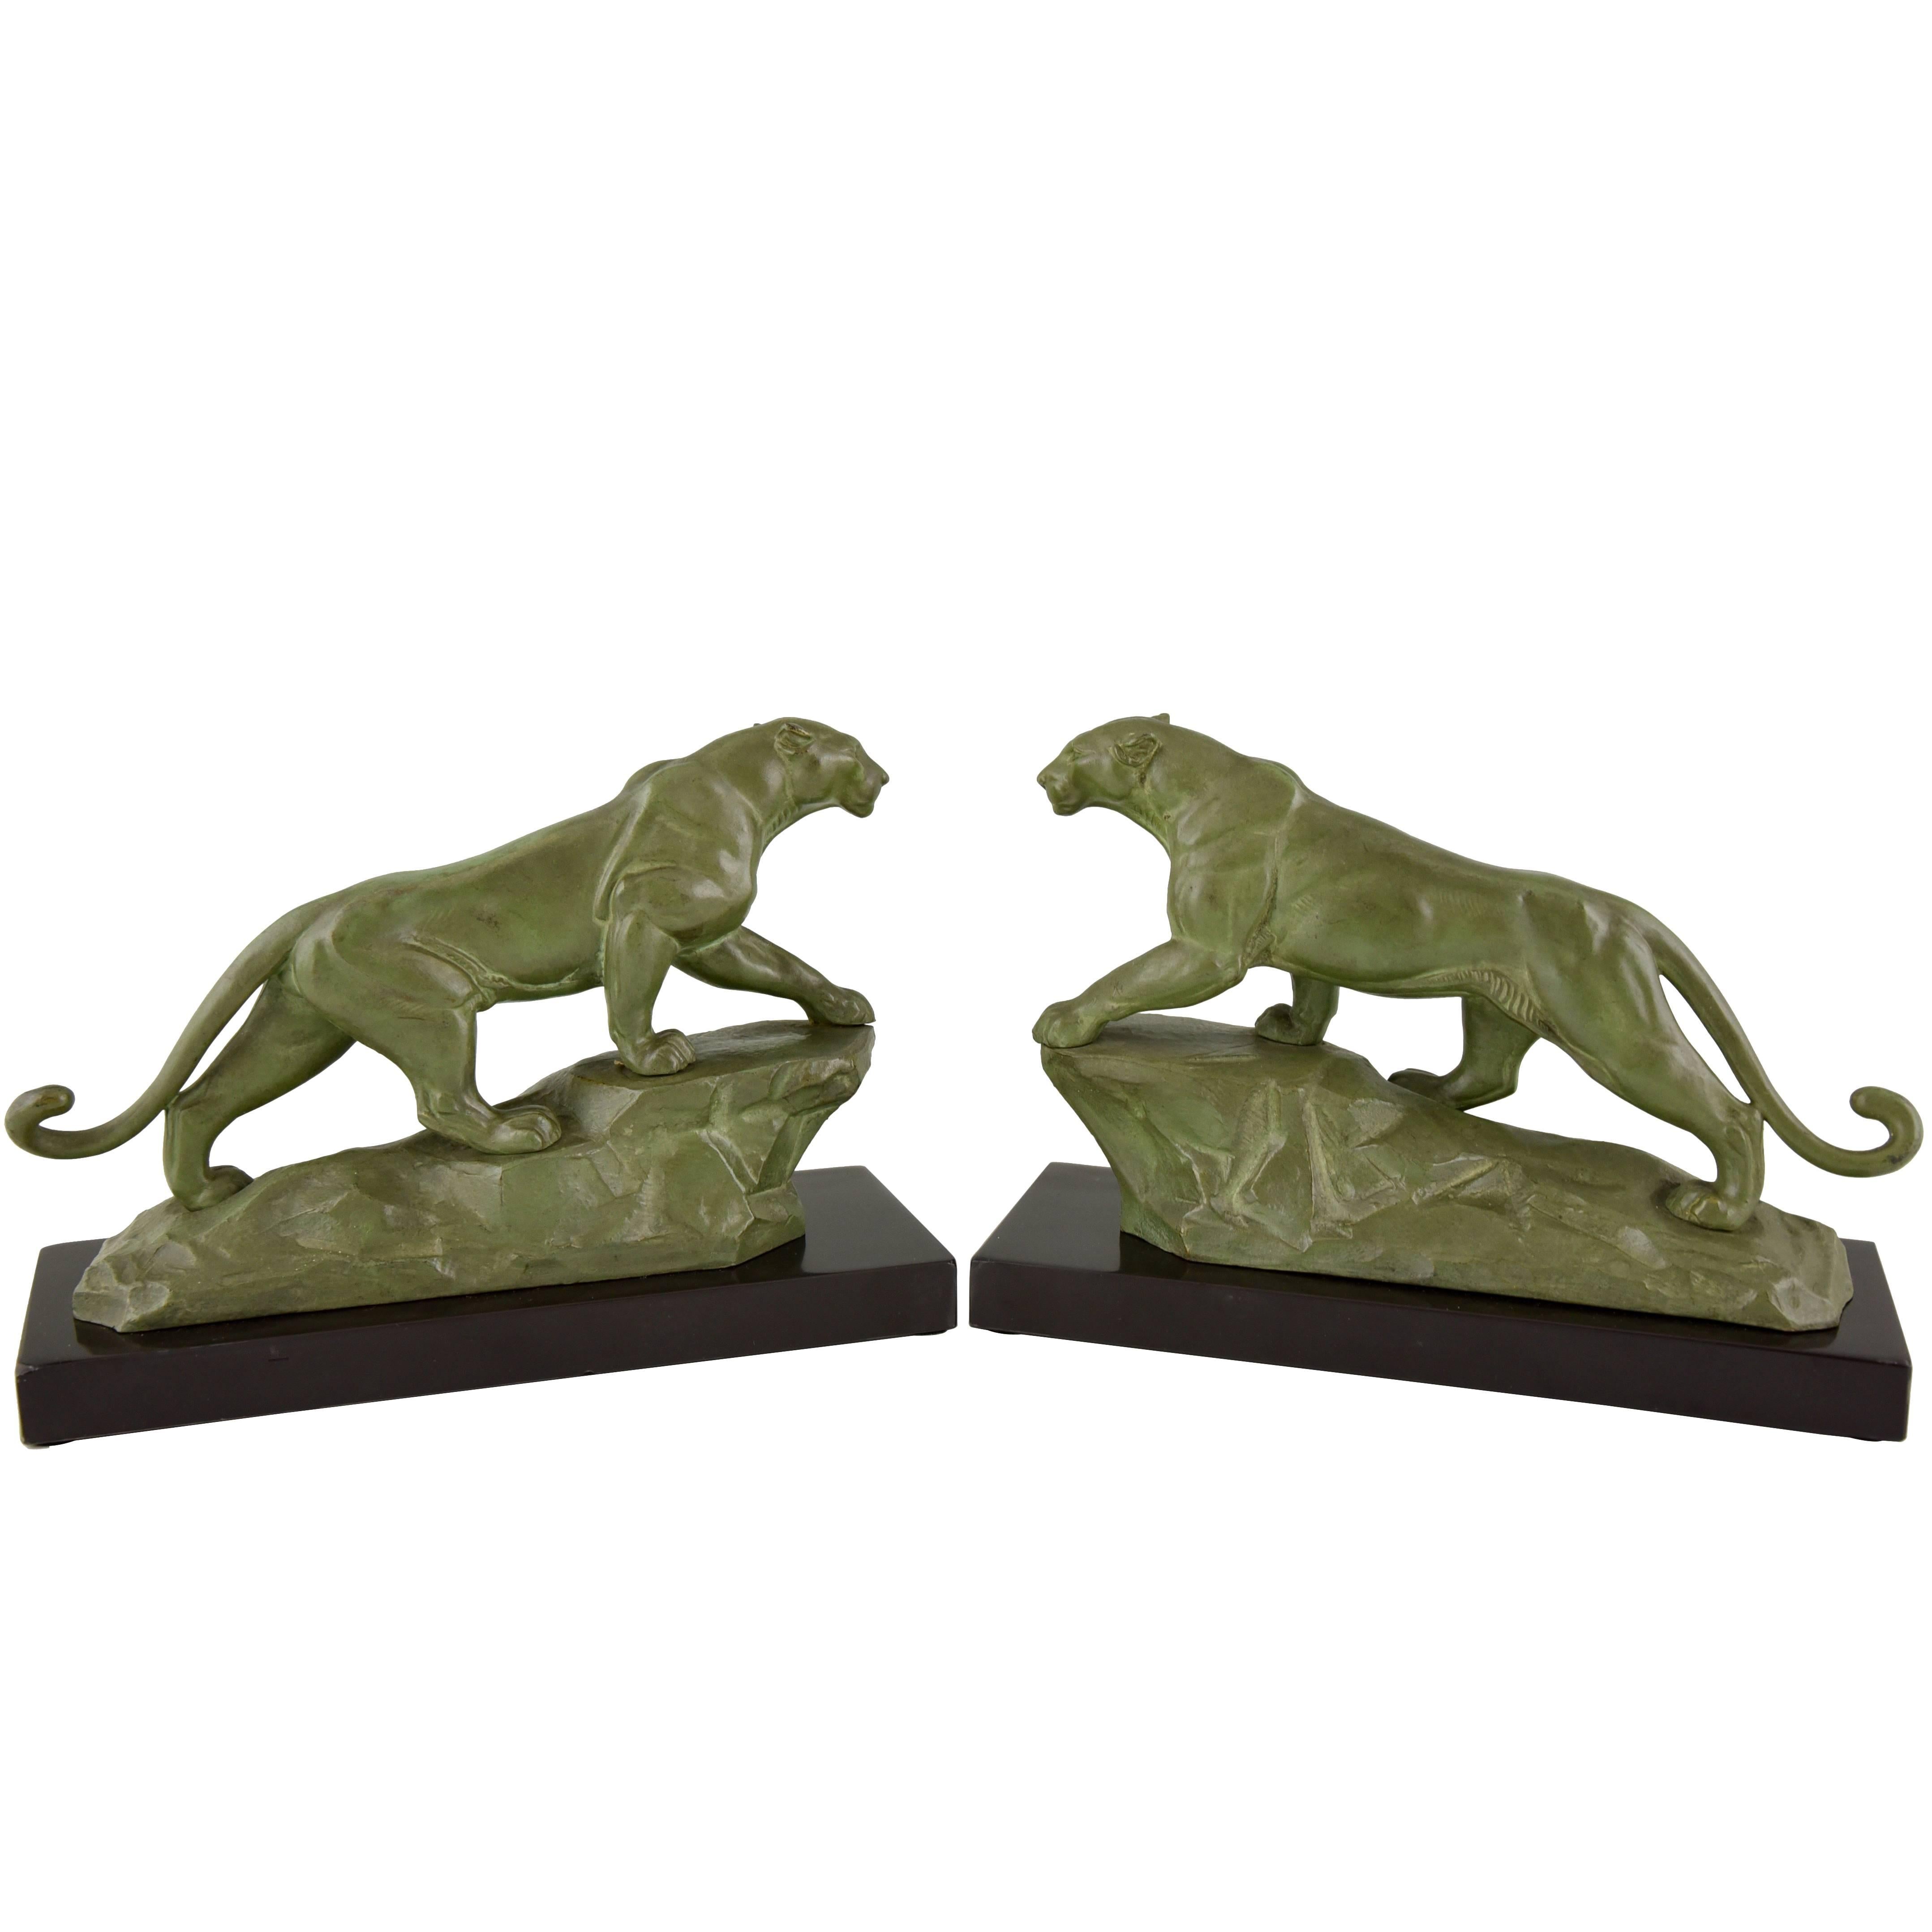 French Art Deco Panther Bookends by Carvin on Marble Base, 1930